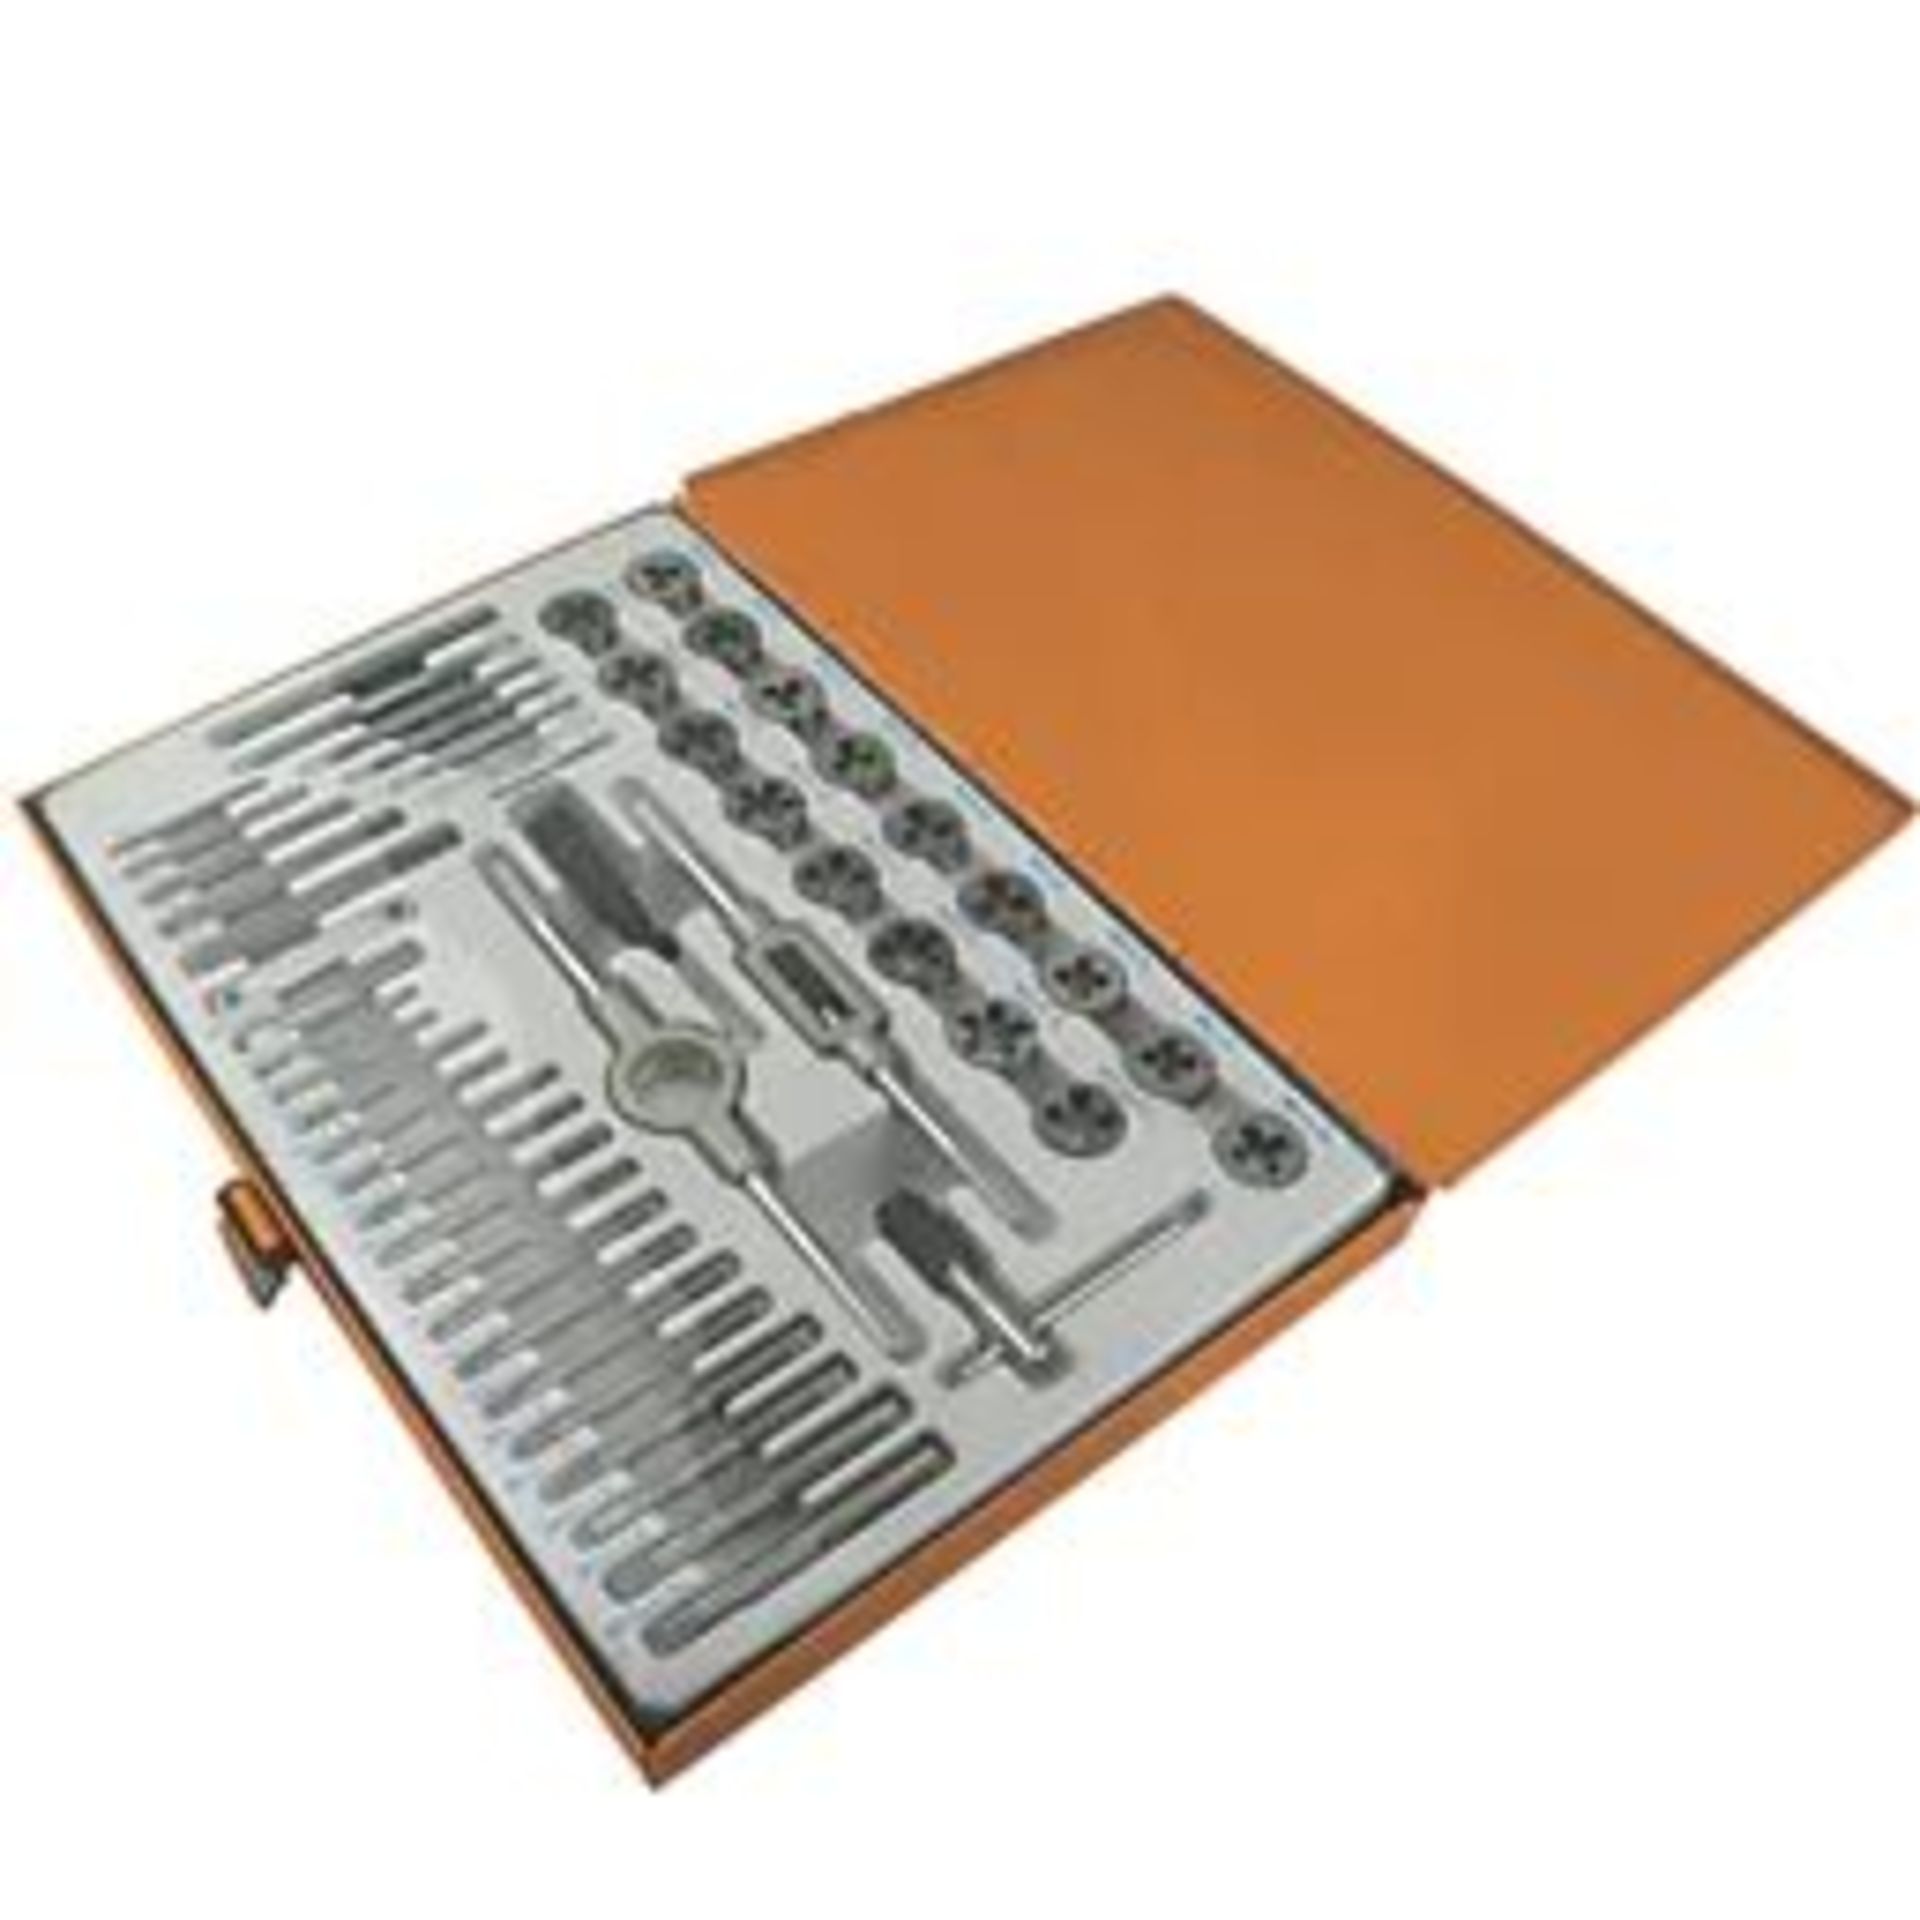 MAGNUSSON M3-M12 MIXED TAP & DIE 51 PIECE SET. - P4. Tap and die set made from high quality steel,